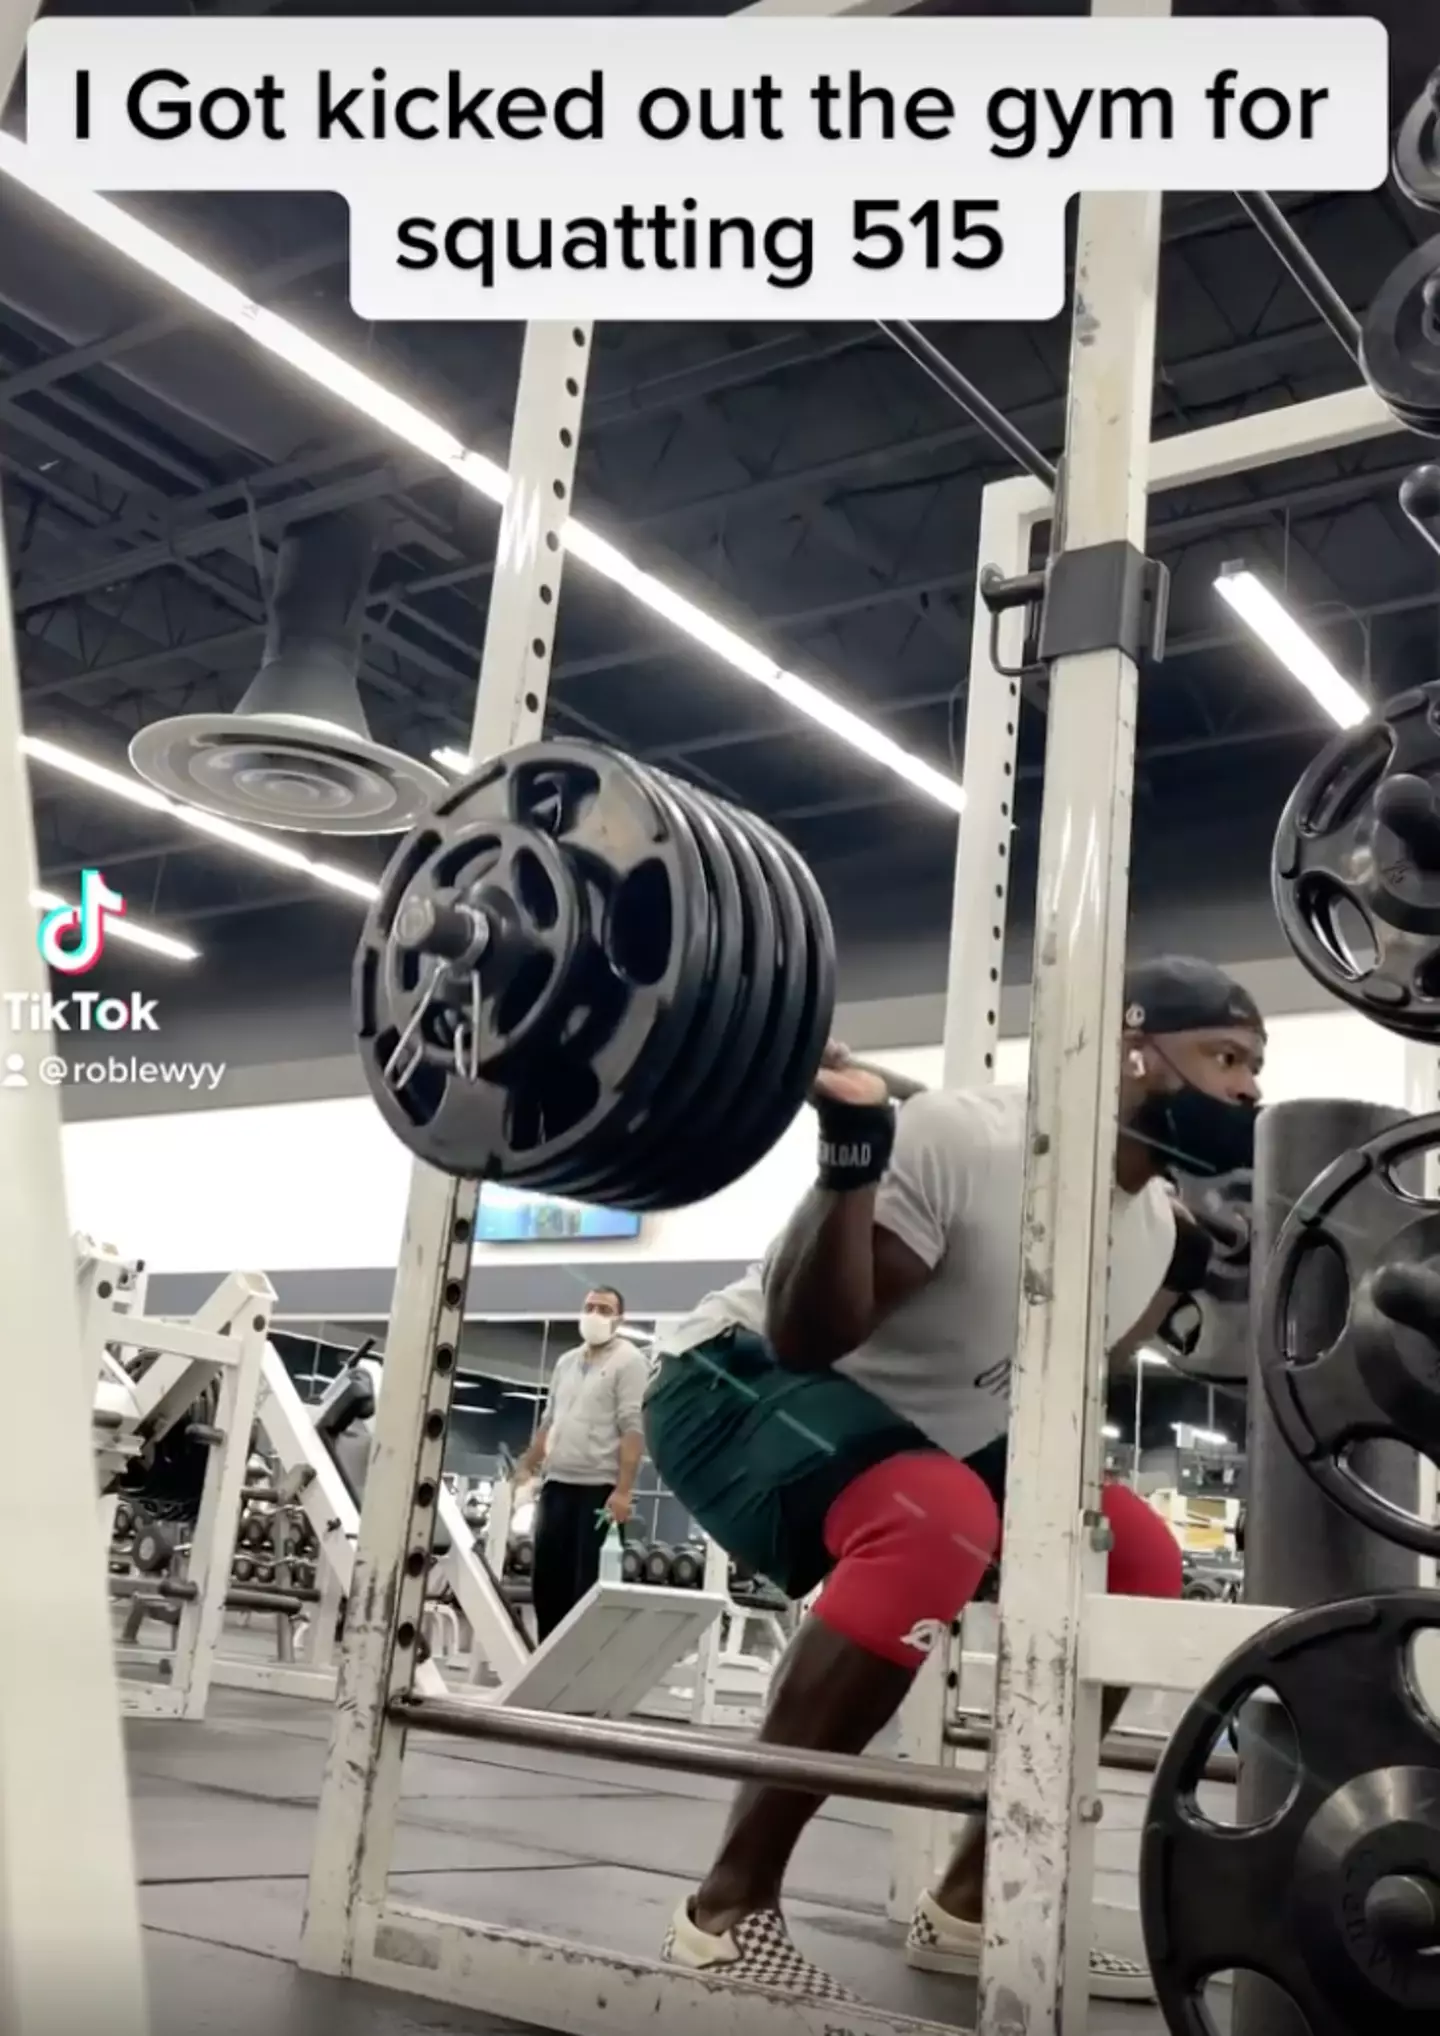 This power lifter got kicked out of the gym for lifting too much.